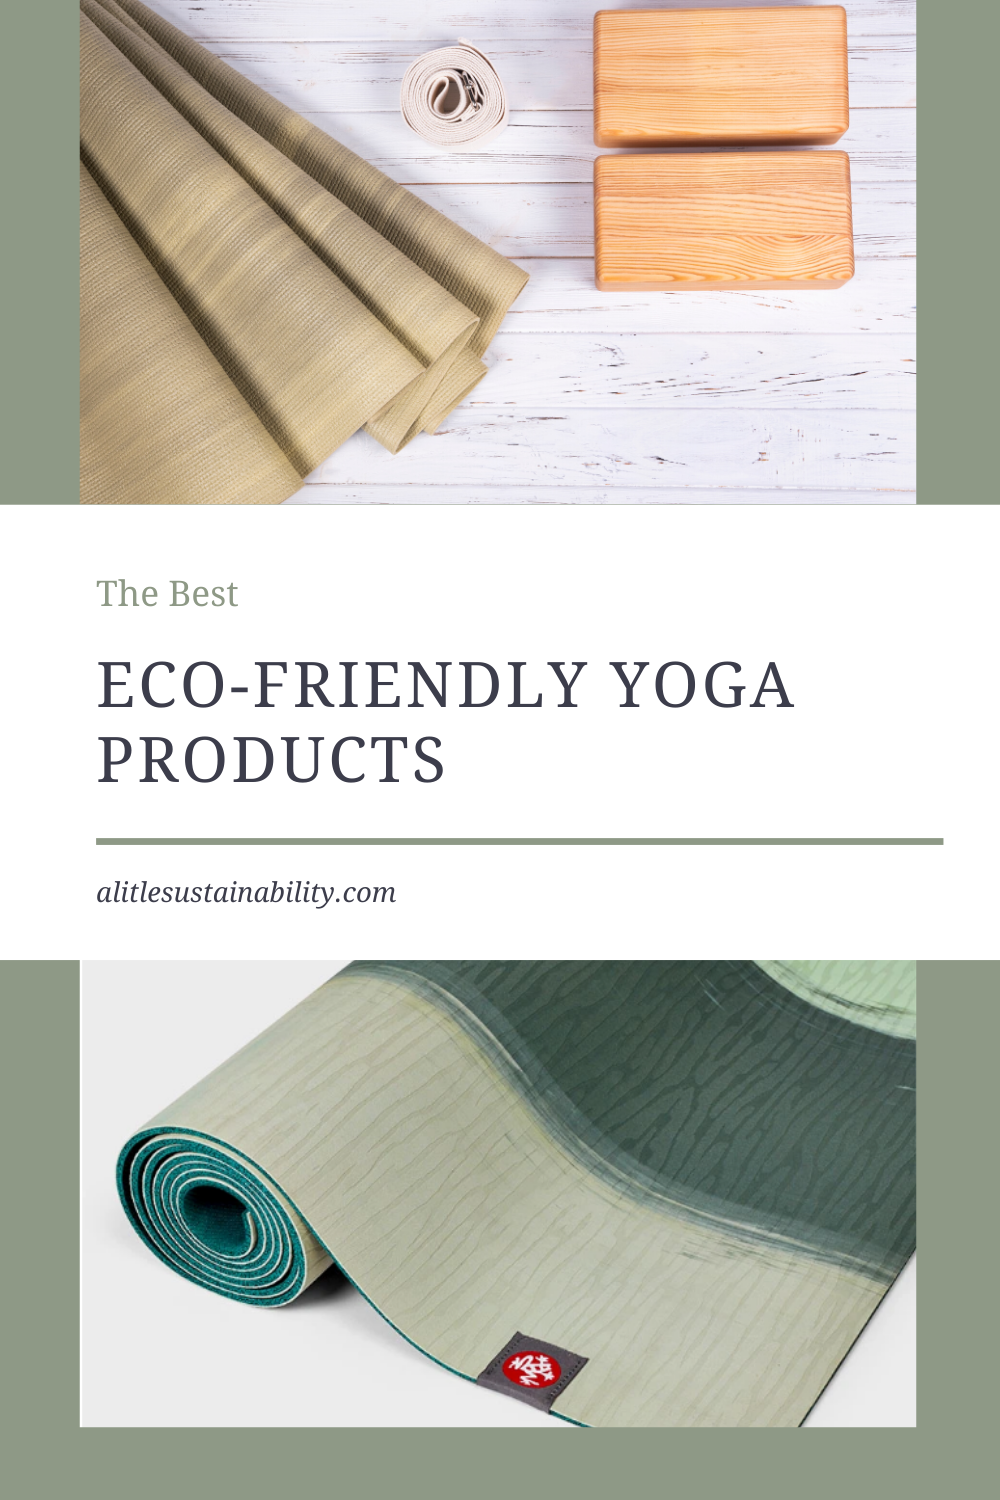 low waste yoga gear and products to help you have a sustainable yoga practice. #yogalife #yogalifestyle #yogaroom #yogaroomideas